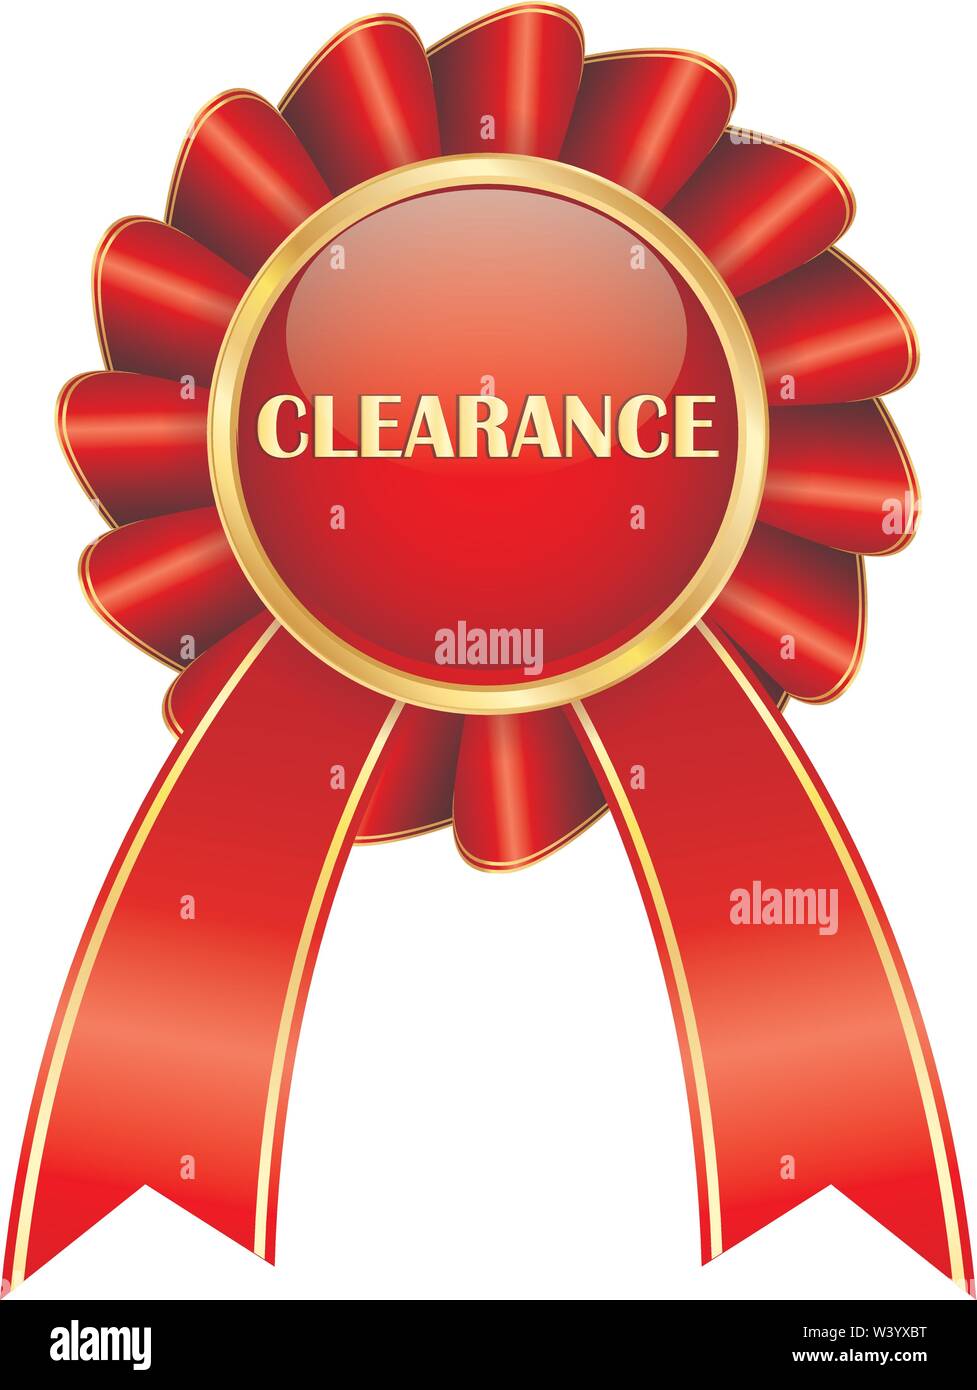 Shop retail sale sign. Clearance badge Stock Vector